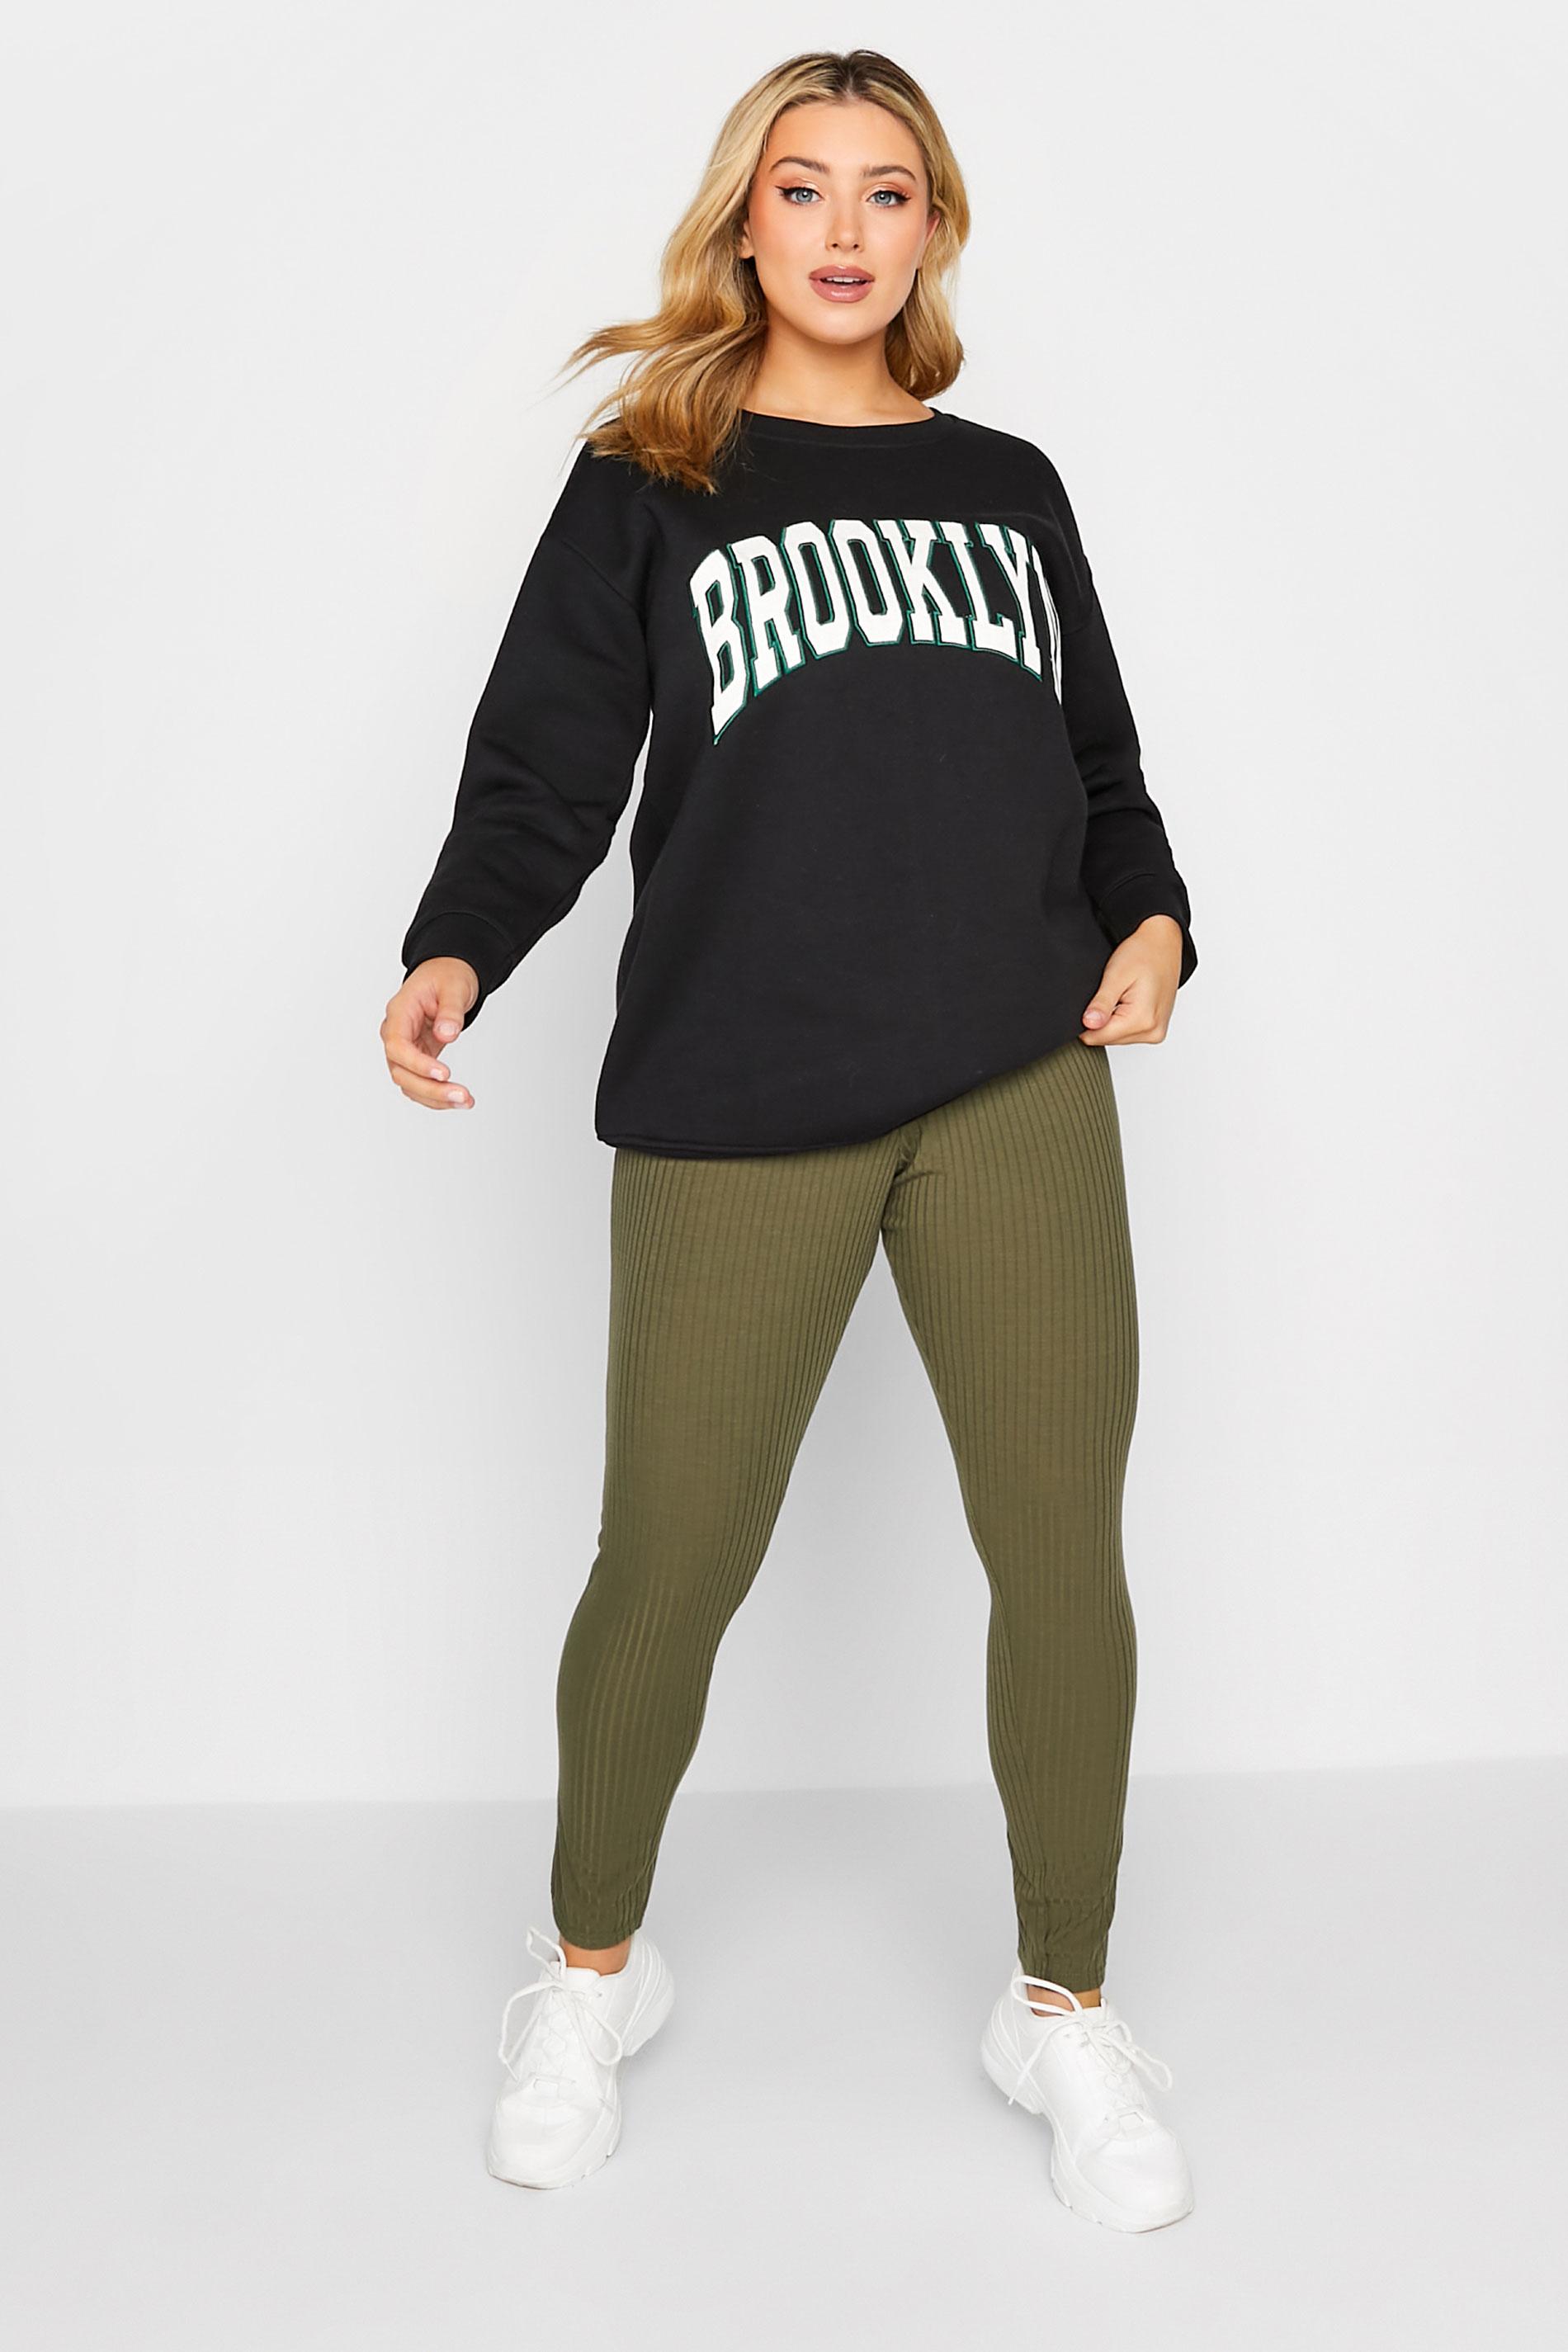 LIMITED COLLECTION Plus Size Khaki Green Ribbed Leggings | Yours Clothing 2